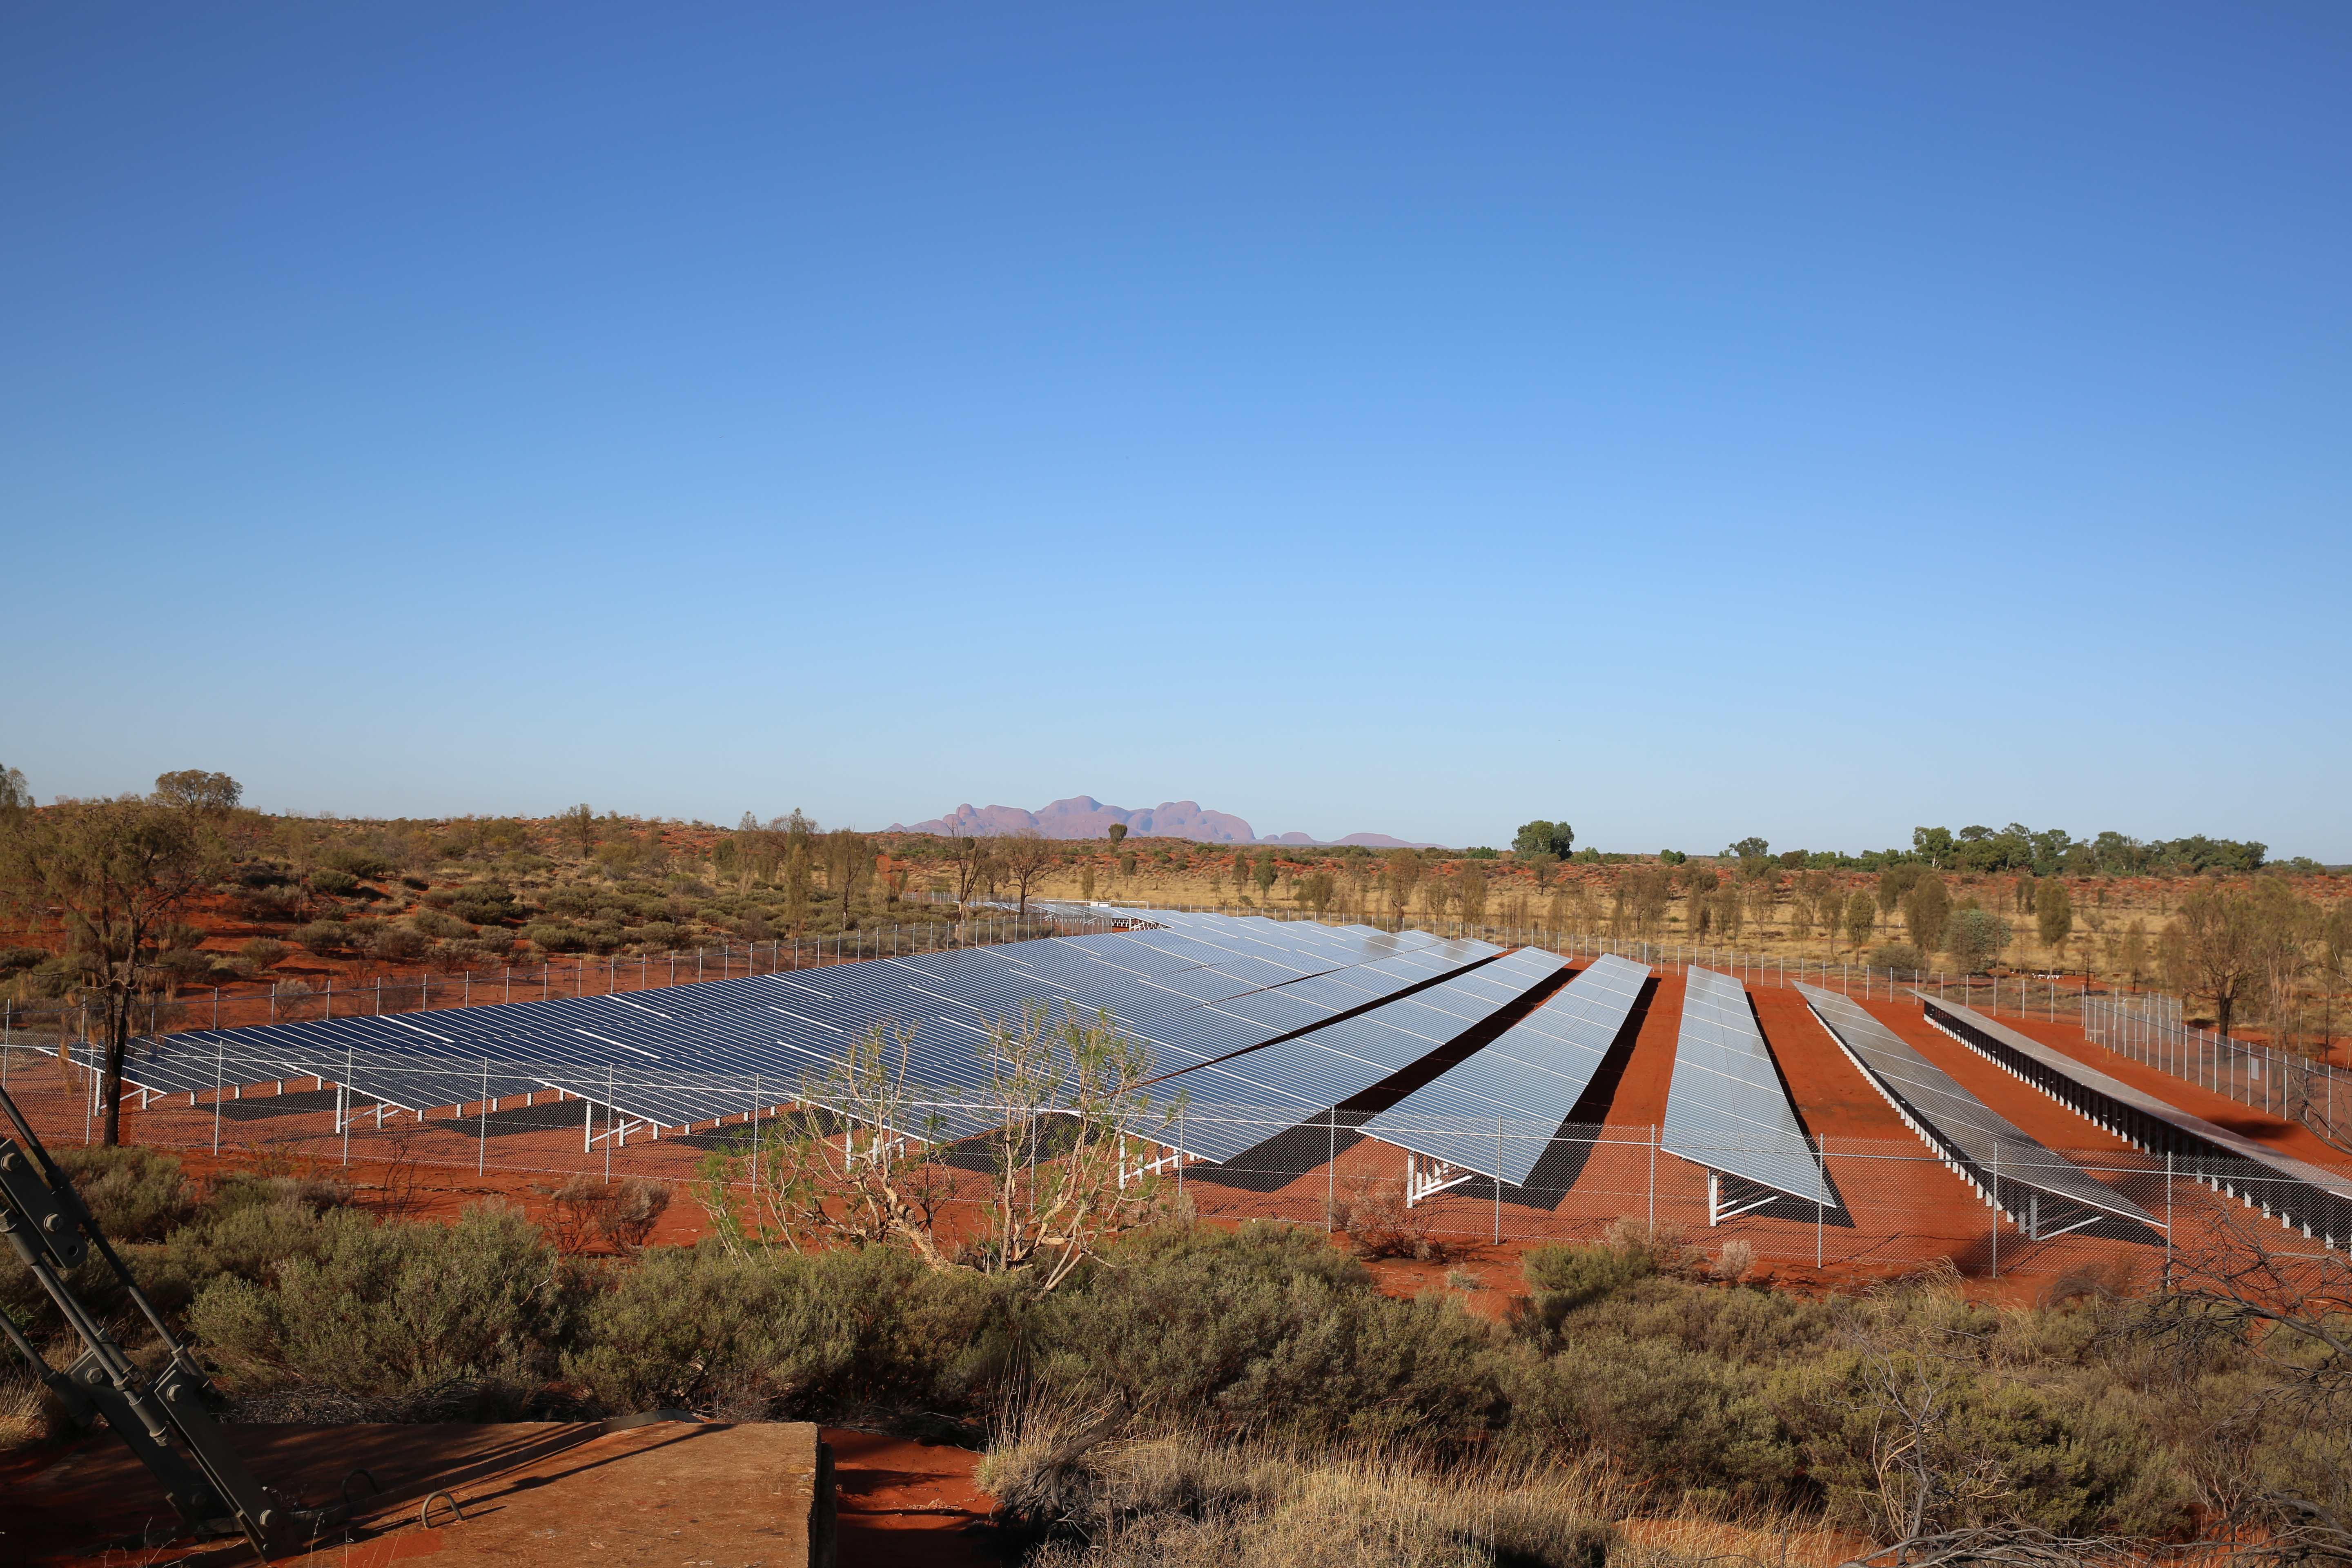 Solar panels by Ayers Rock